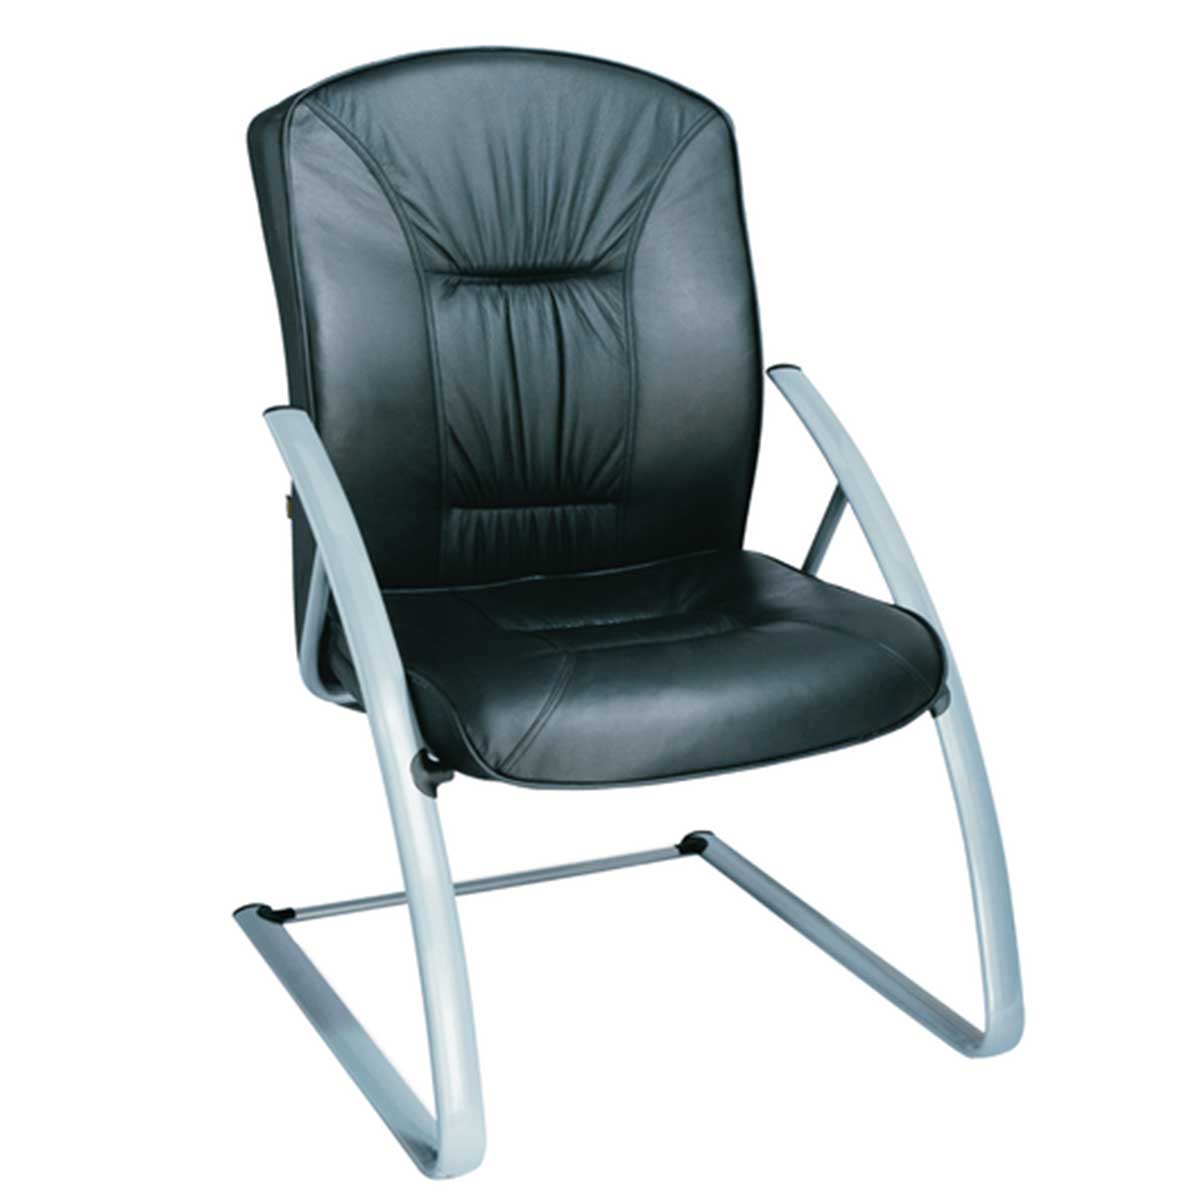 Leather office chair Manufacturers, Suppliers in Lawrence Road